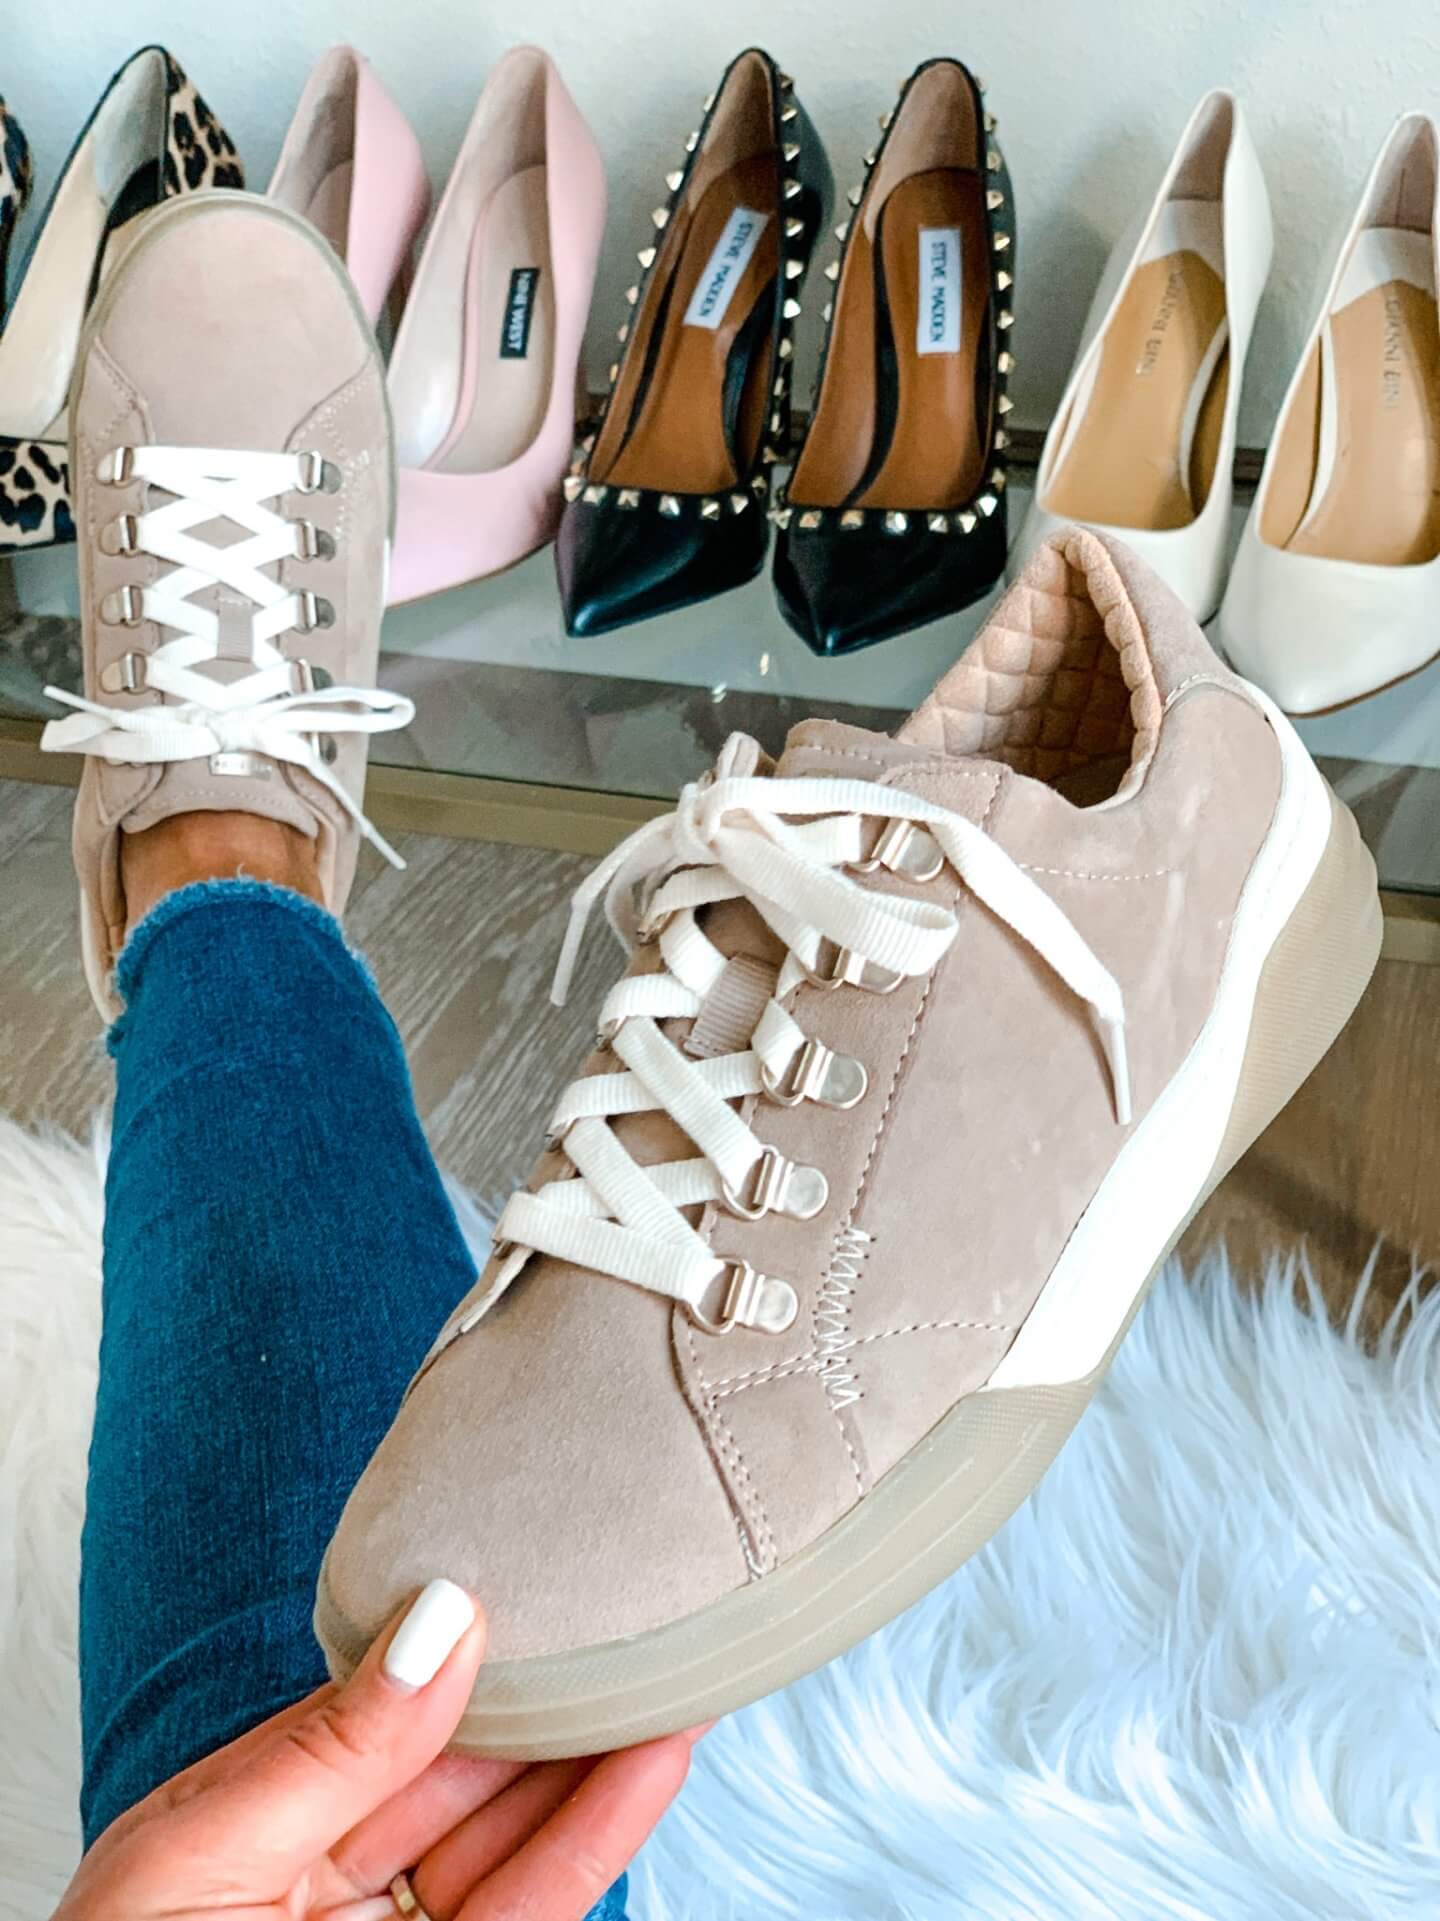 New Shoes For 2022 Review + Giveaway! - The Double Take Girls